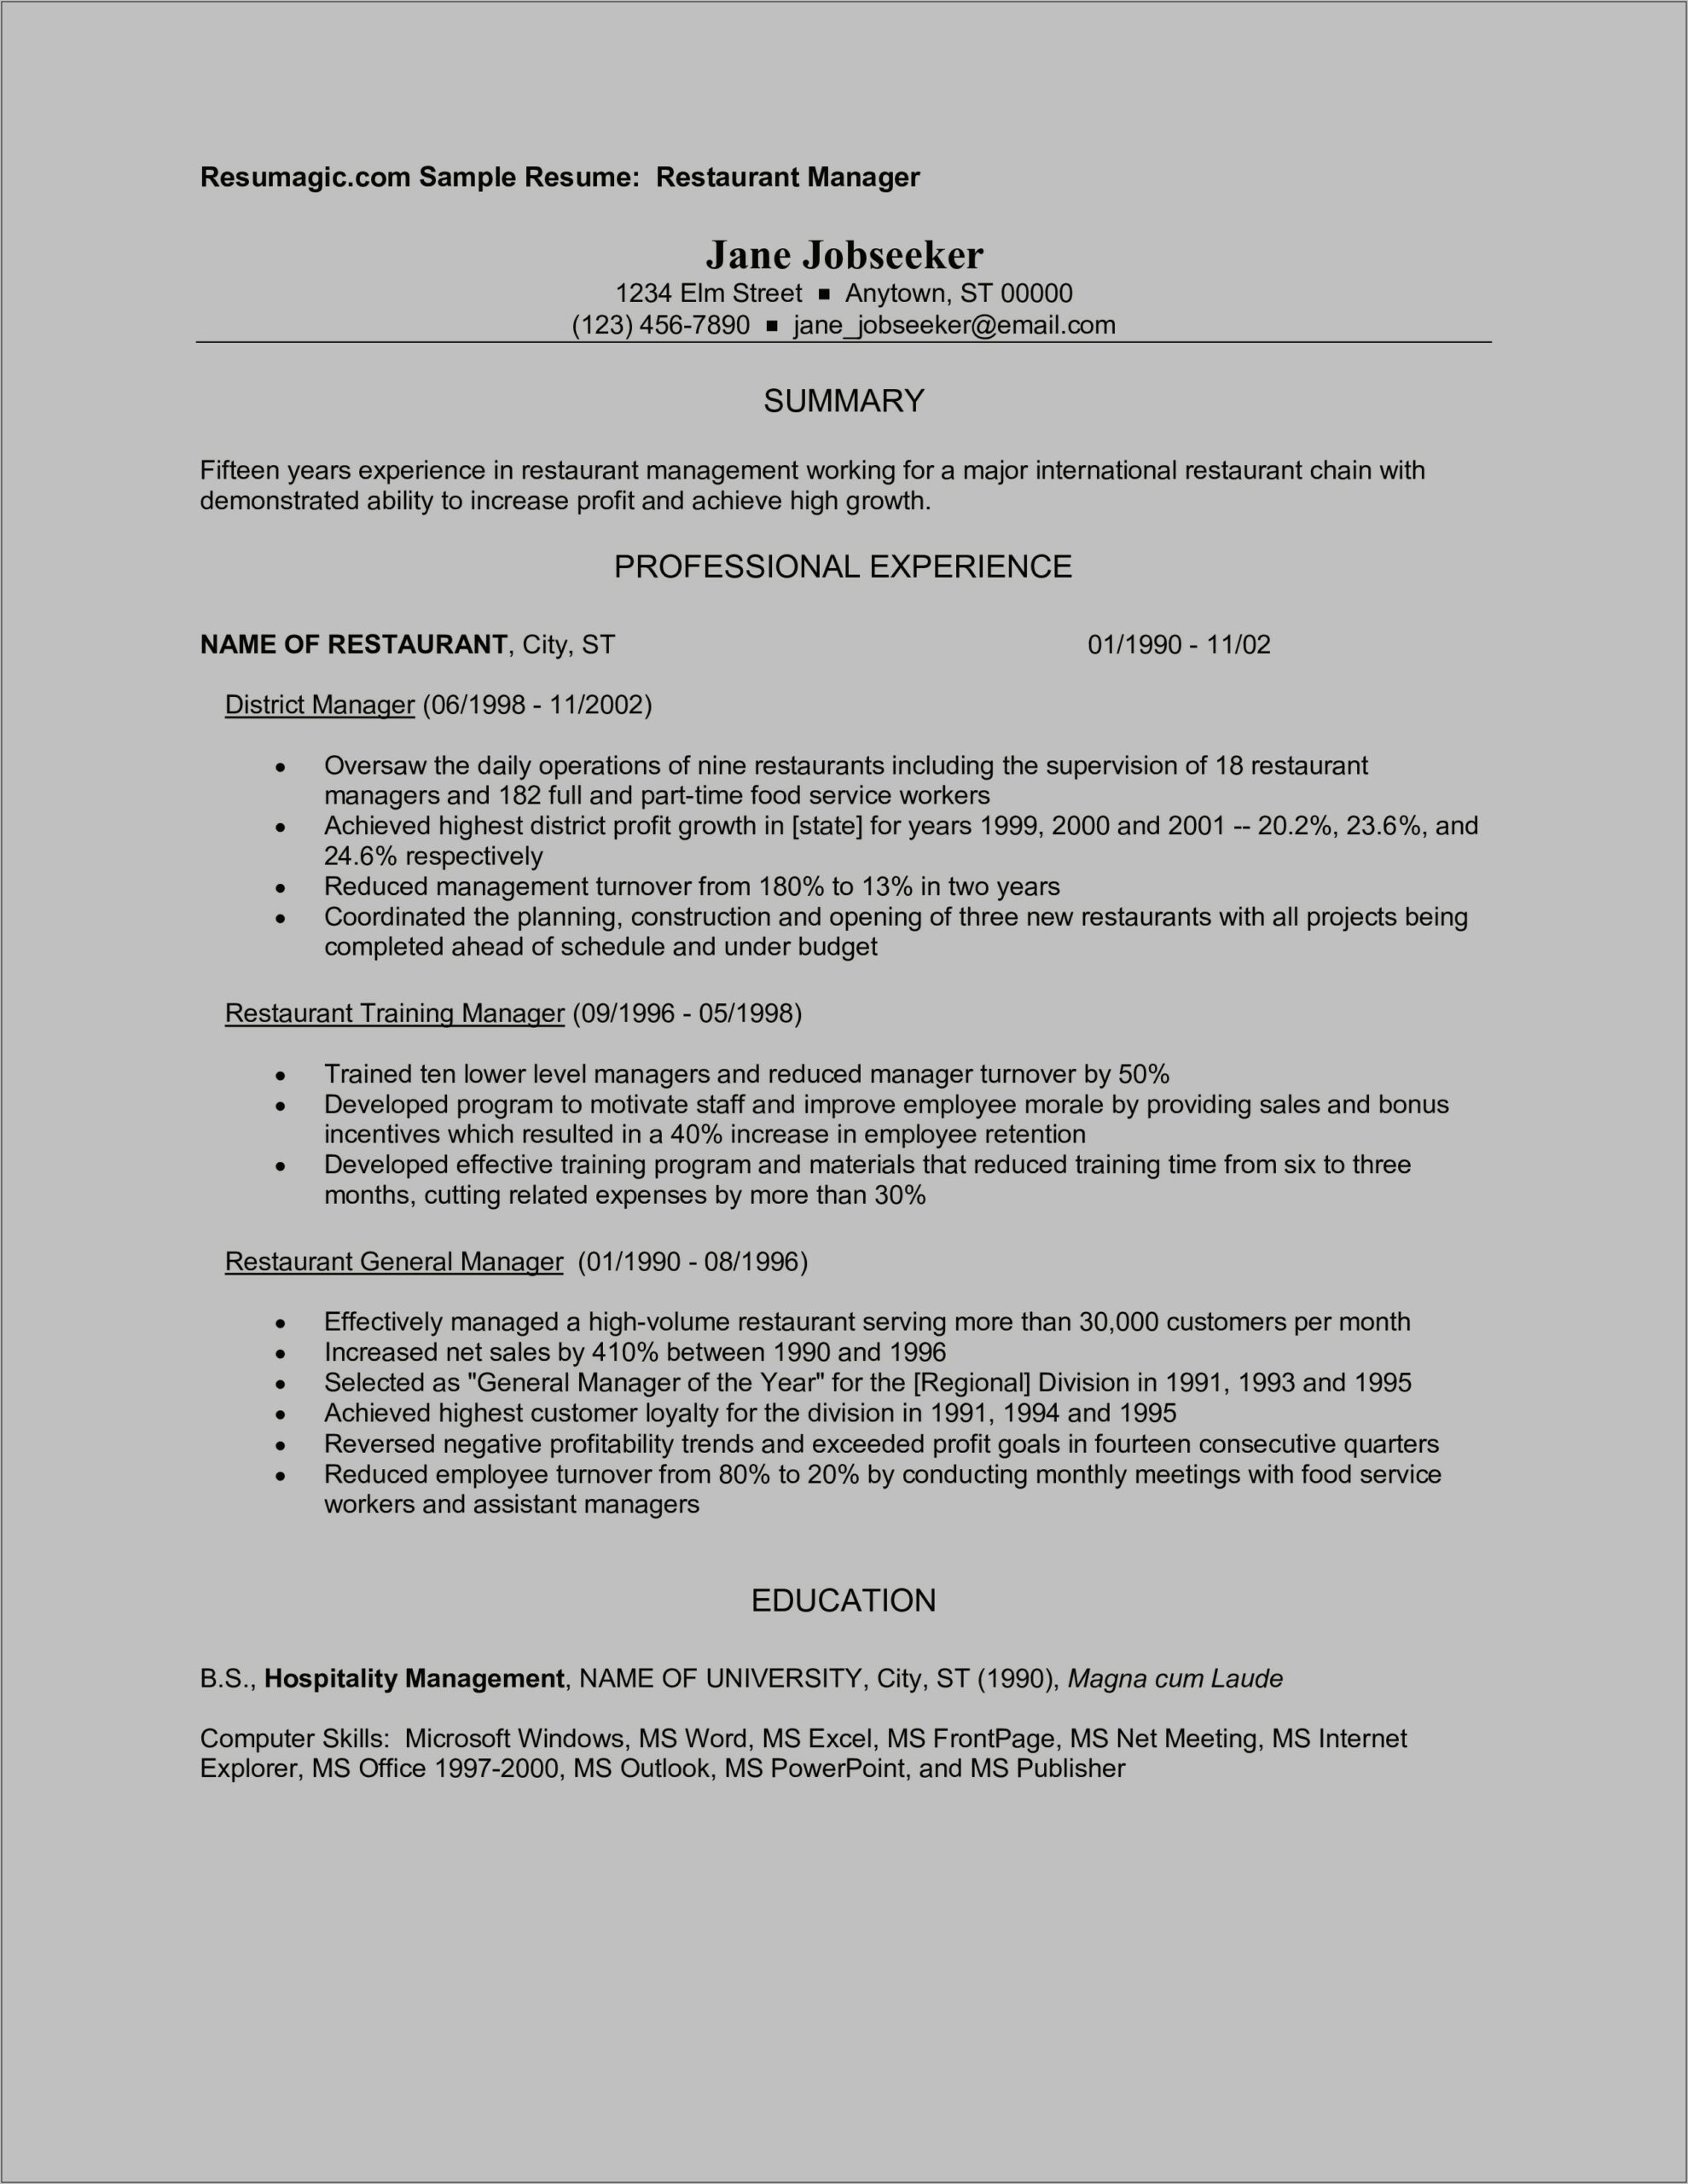 Resume From Restaurant Manager To School Office